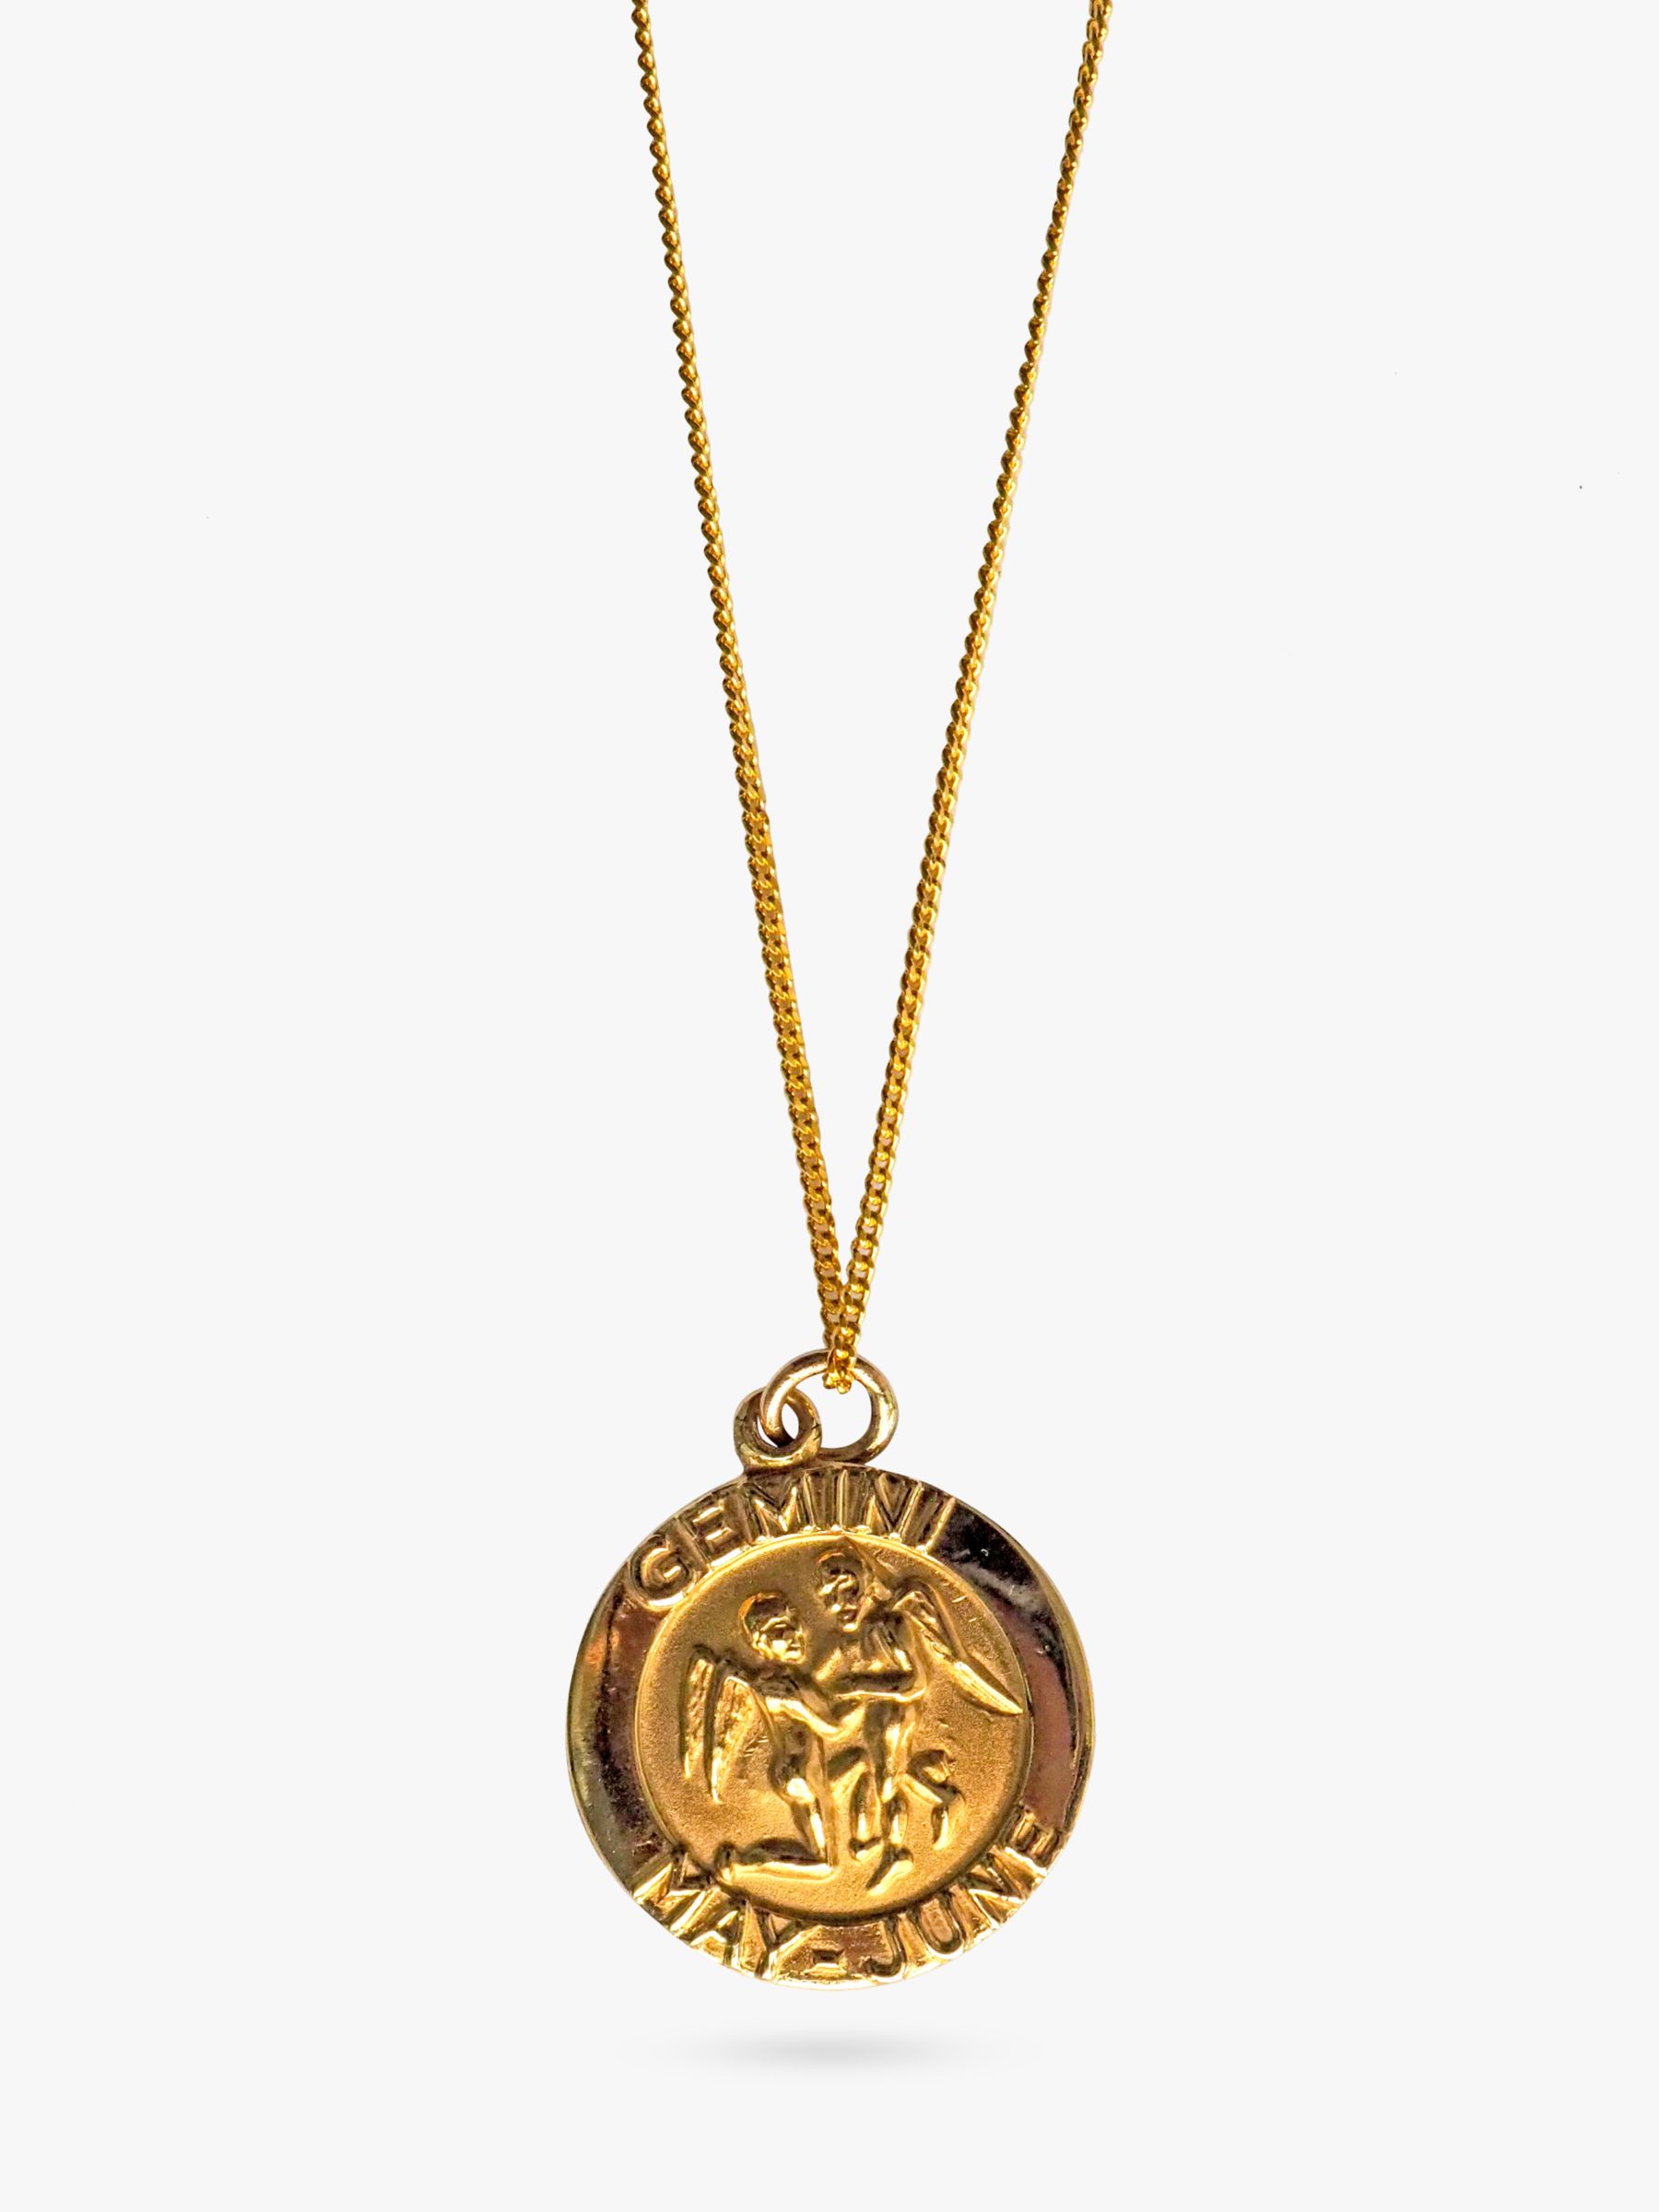 Buy L & T Heirlooms Second Hand 9ct Gold Gemini Pendant Necklace, Dated Circa 1975 Online at johnlewis.com